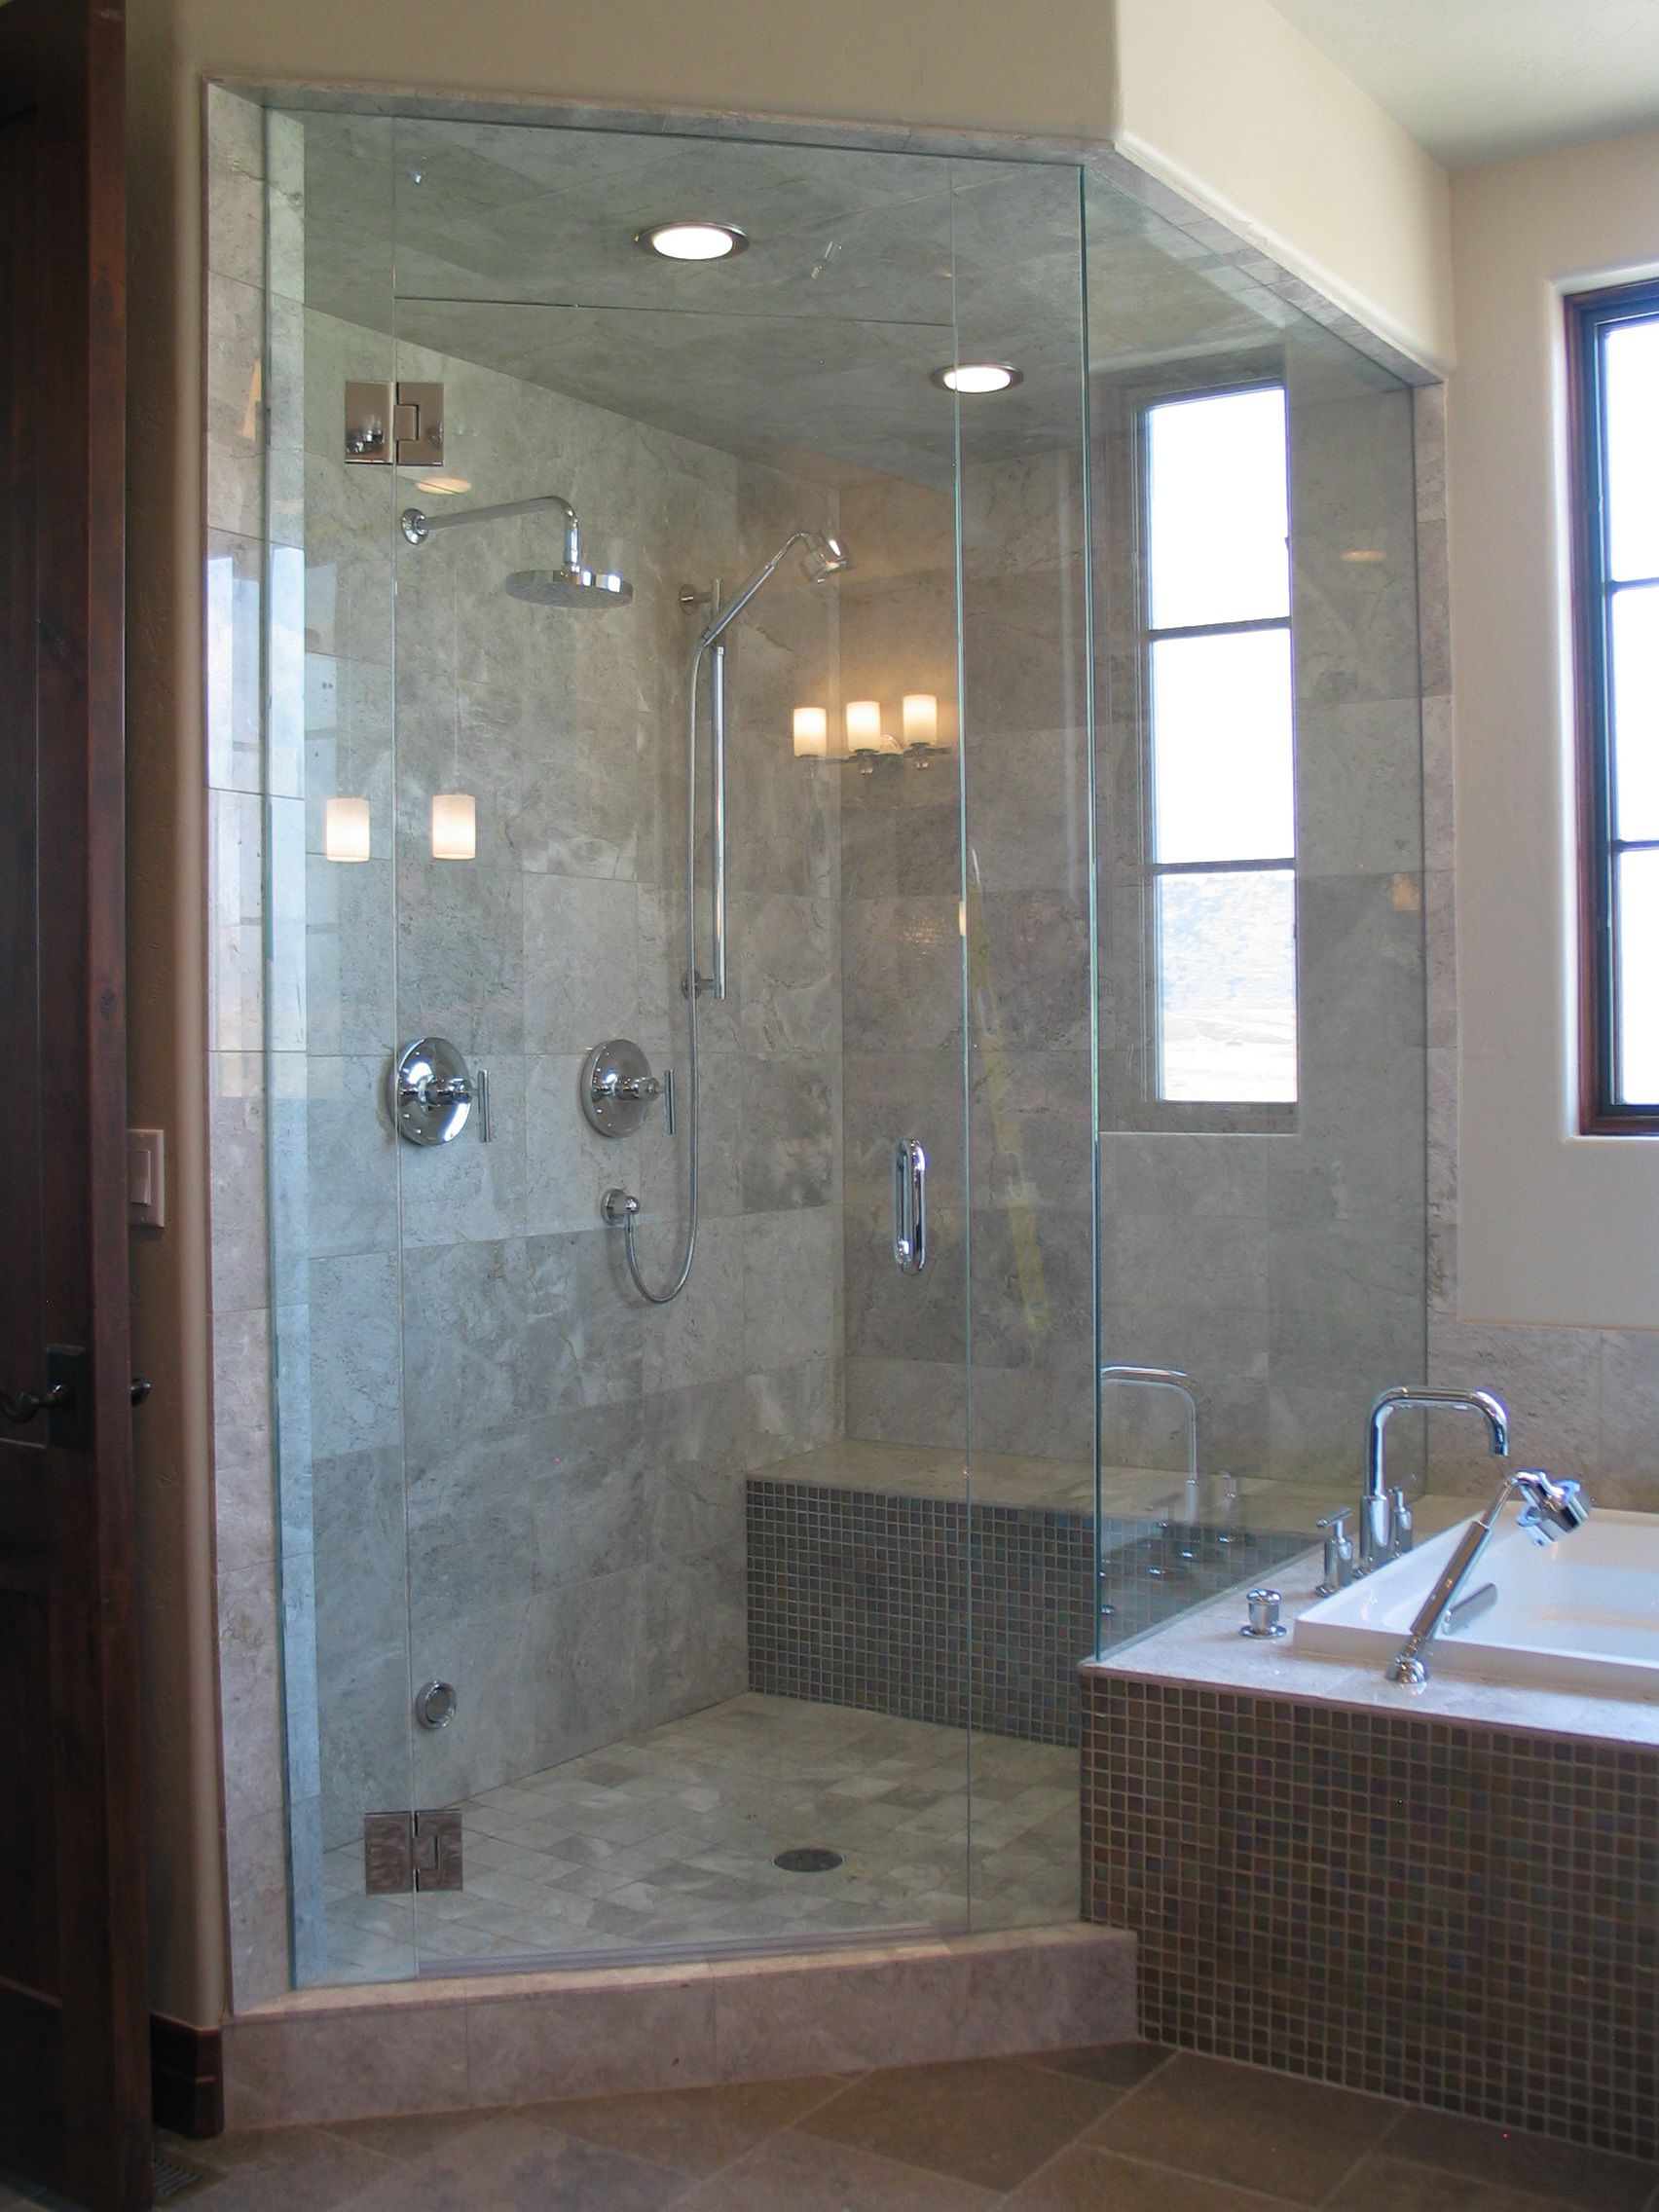 Frameless Shower Two Glossy Frame Less Shower Doors With Two Lamps In Modern House Bathroom Icon Bathroom Frameless Shower Doors And Pros-Cons You Must Know